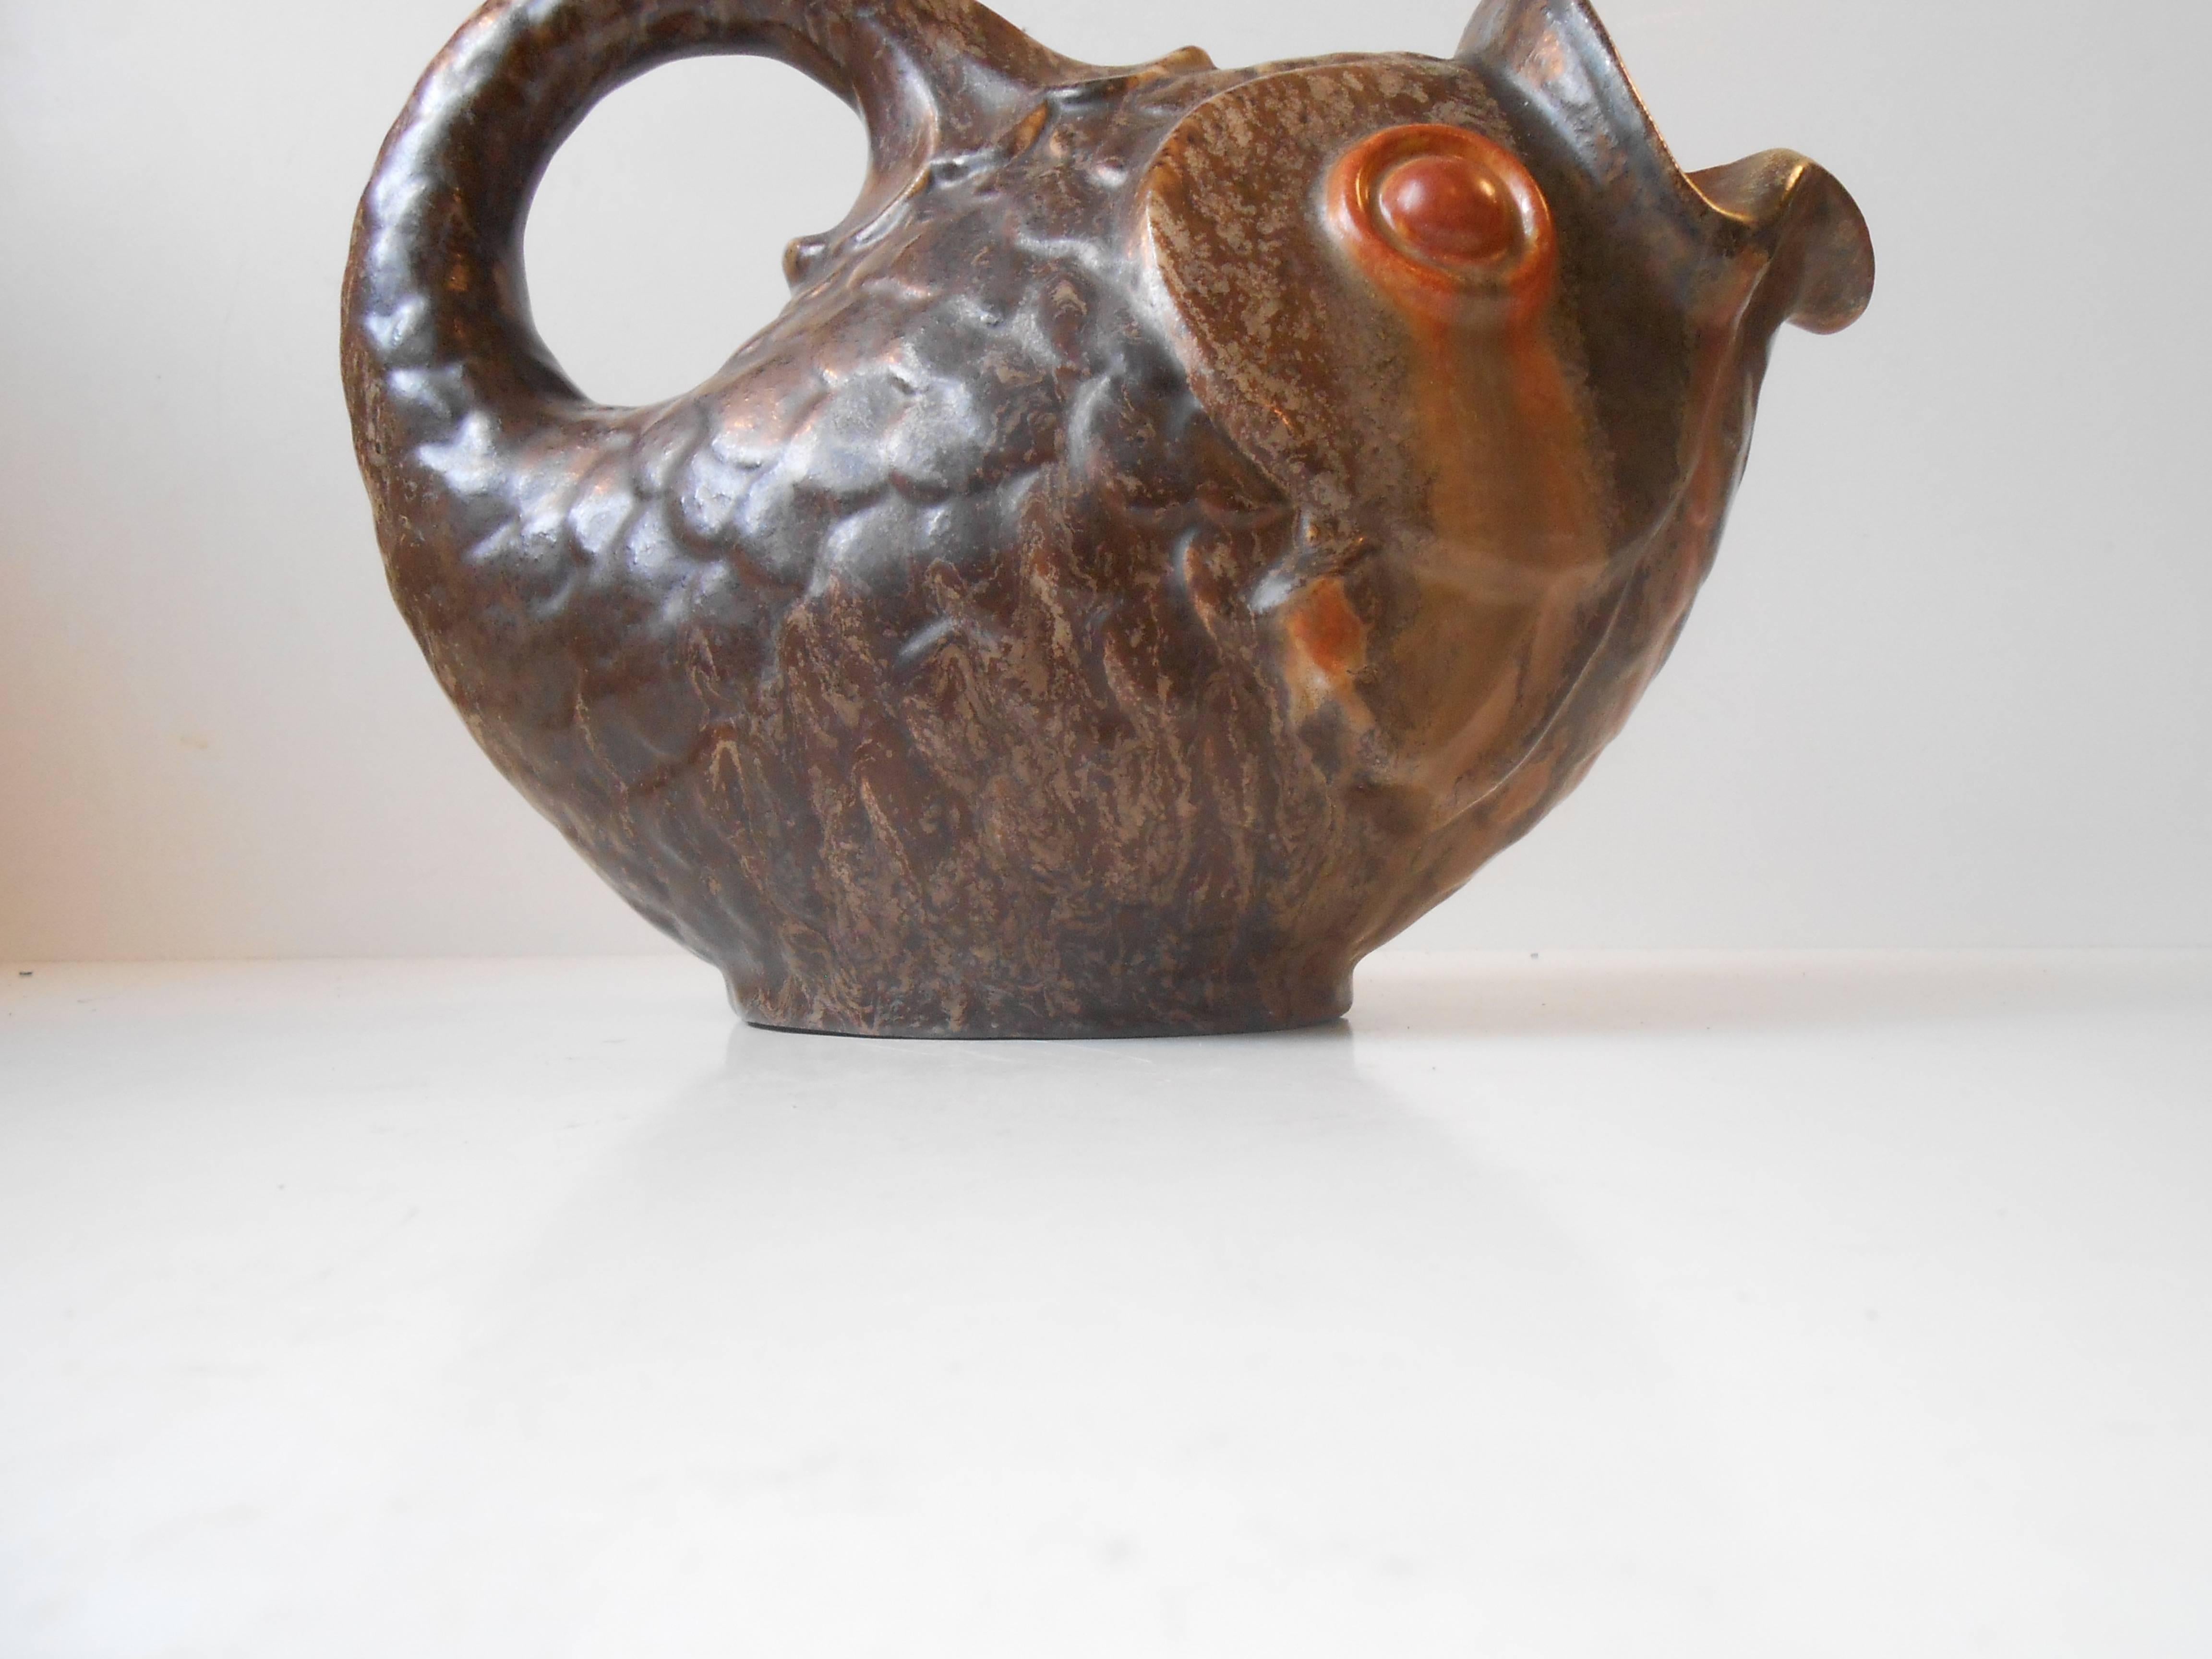 Large fish-shaped ceramic pitcher. Measurements: L: 9.5 inches (24 cm), H: 7.7 inches (19.5 cm). Stamped with the Crestmark of Michael Andersen & Son and the serial/model number: 4462.
Wellkept, clean and intact condition.